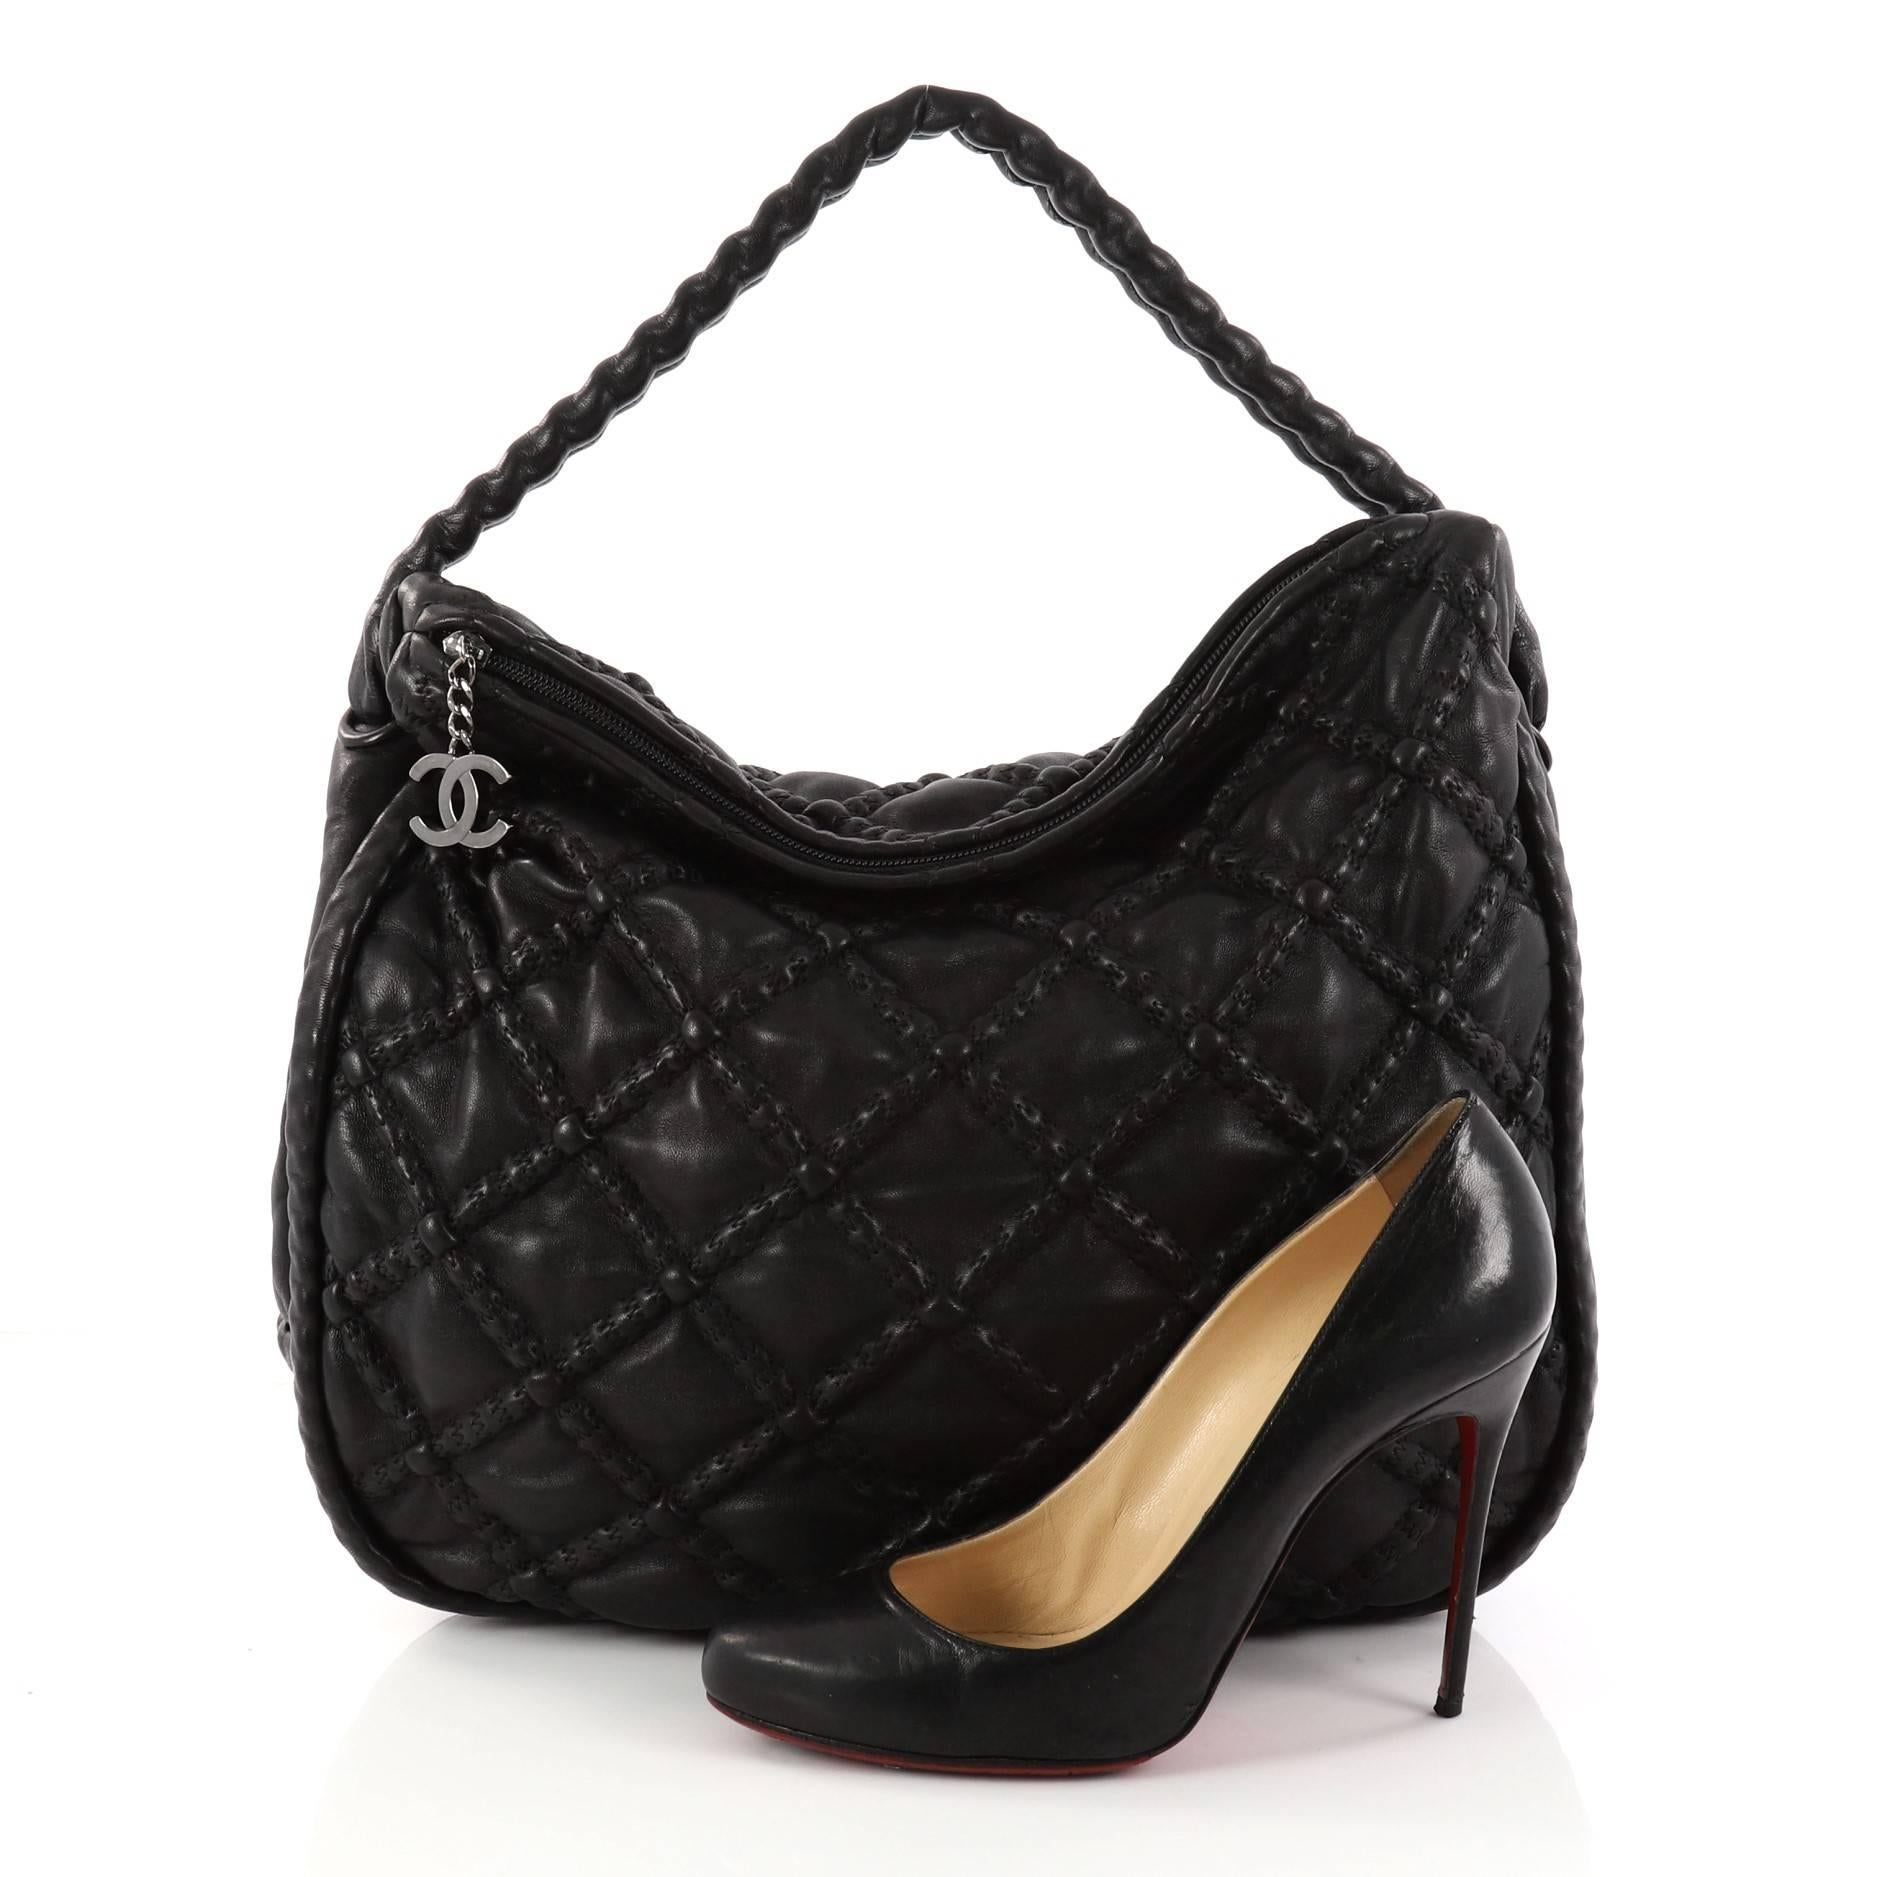 This authentic Chanel Hidden Chain Hobo Quilted Lambskin Large is an exquisite edgy hobo made for modern fashionistas. Crafted in black concealed quilted lambskin leather, this hobo features a hidden chain handle wrapped in leather, a CC zipper pull